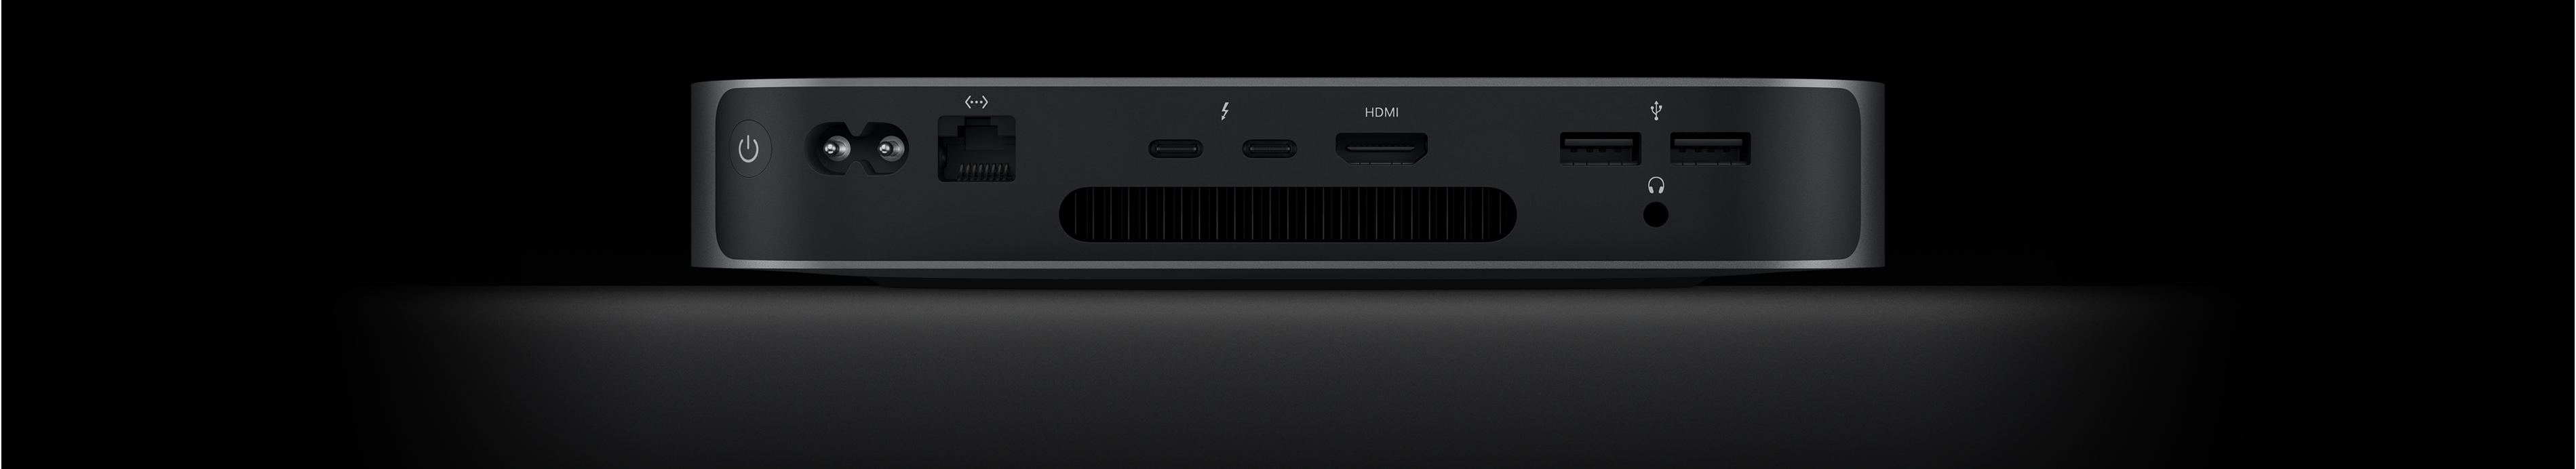 Back view of Mac mini showing the two Thunderbolt 4 ports, HDMI port, two USB-A ports, headphone jack, Gigabit Ethernet port, power port and power button.